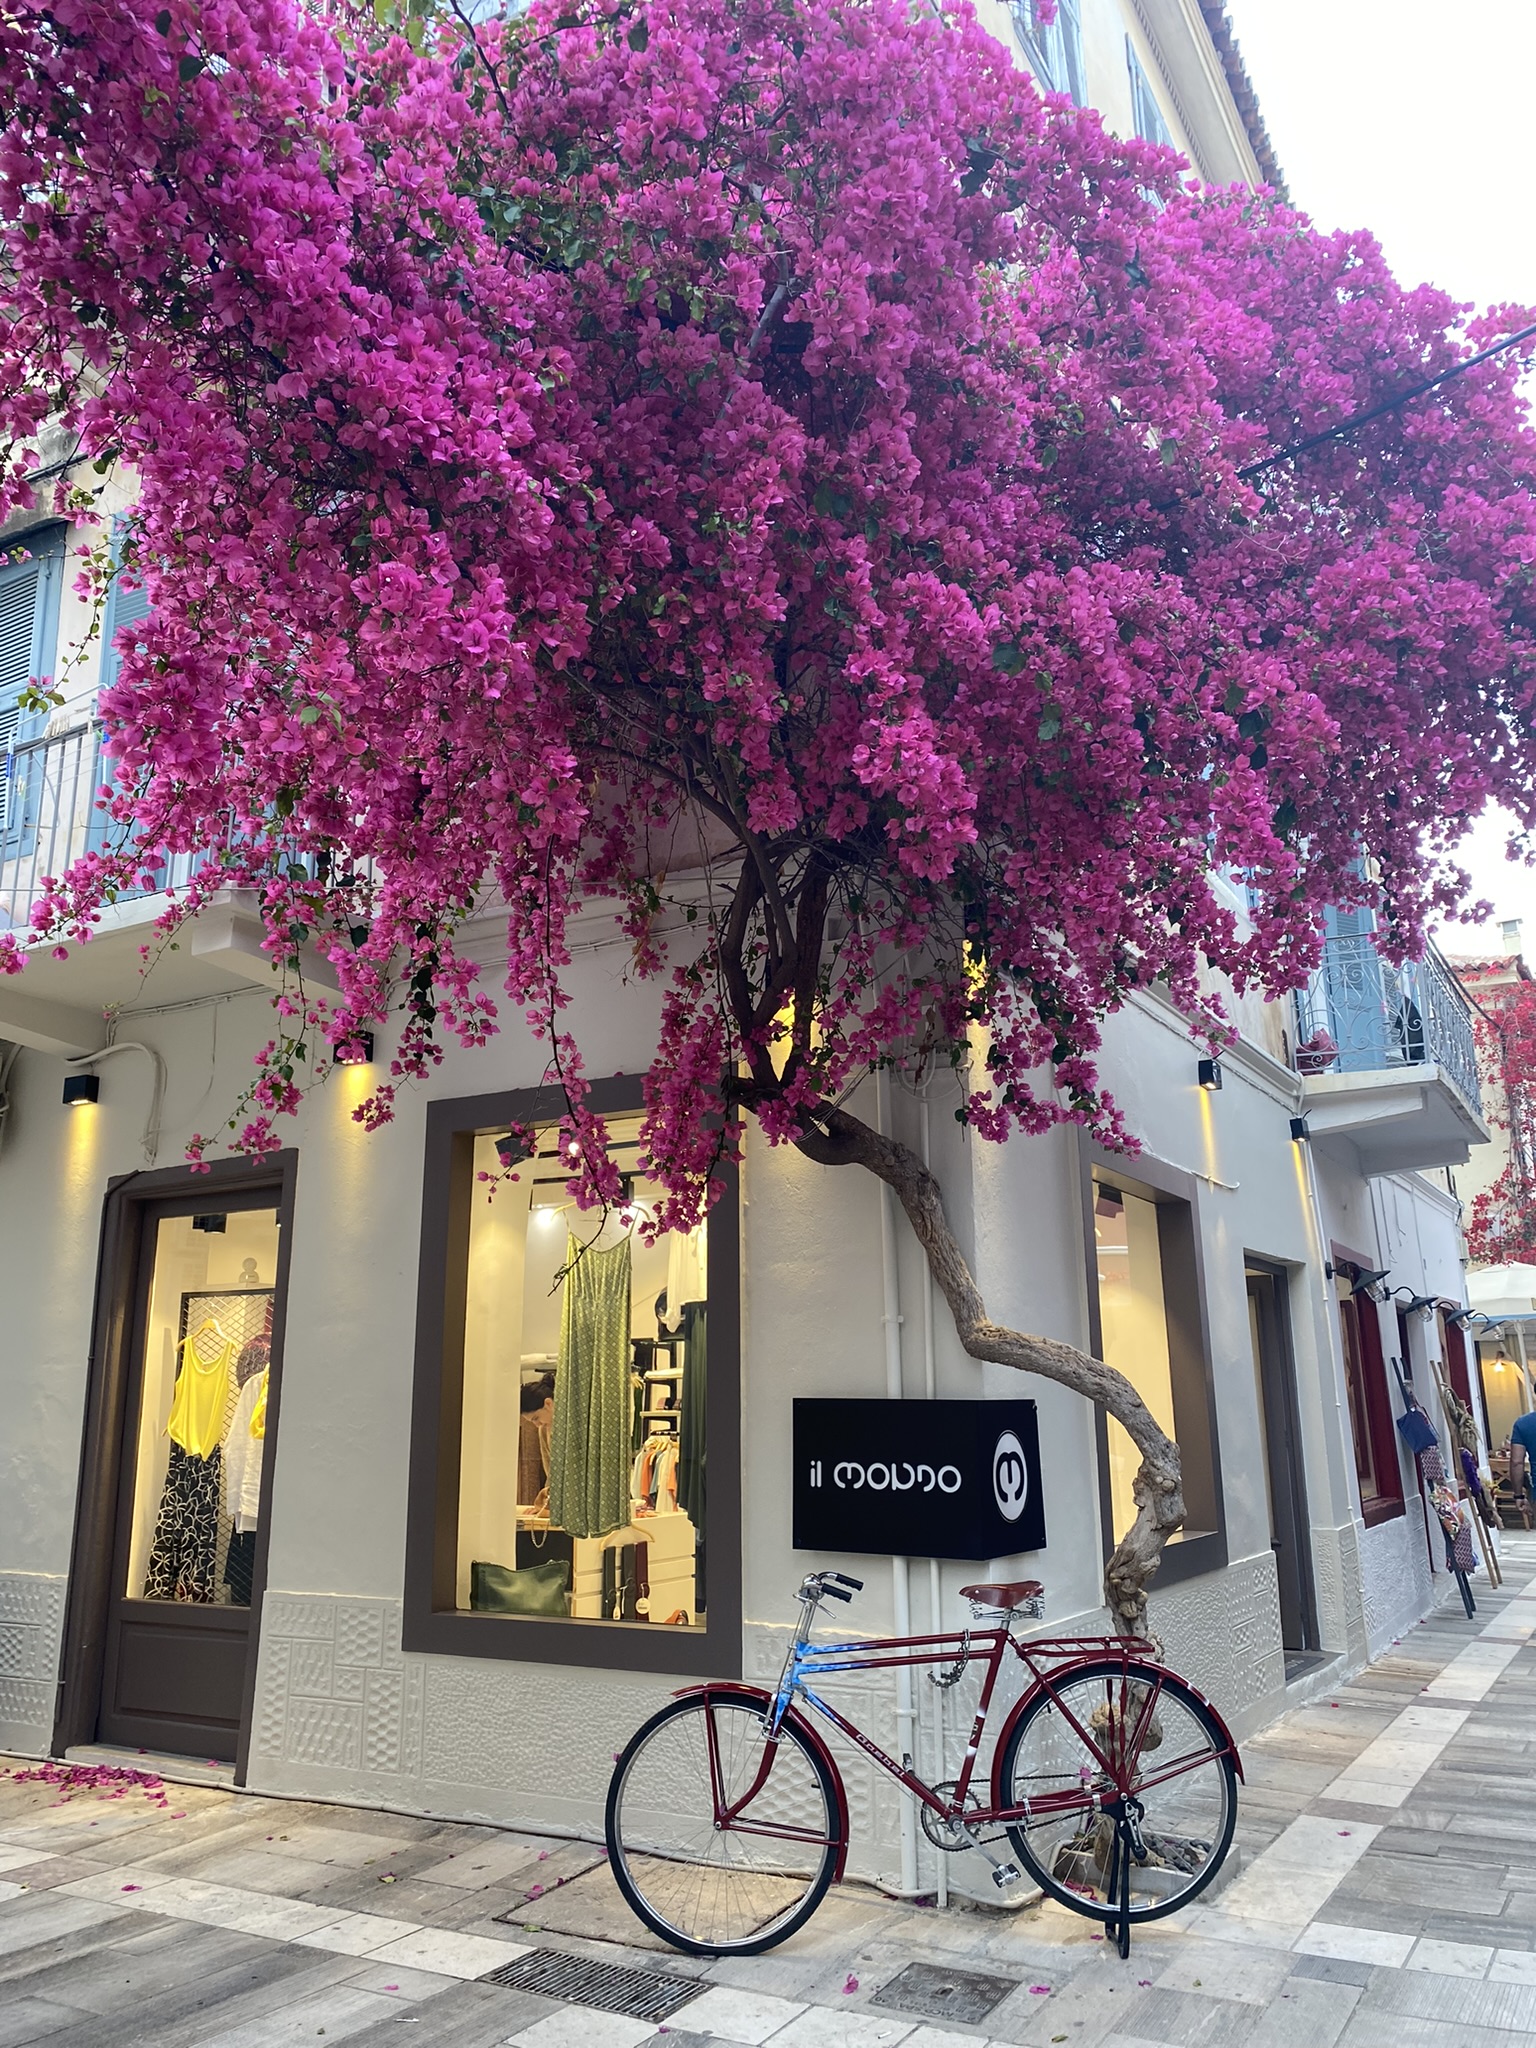 A beautiful blooming purple tree on the corner of a street in Nafplio, Greece with a bicycle below